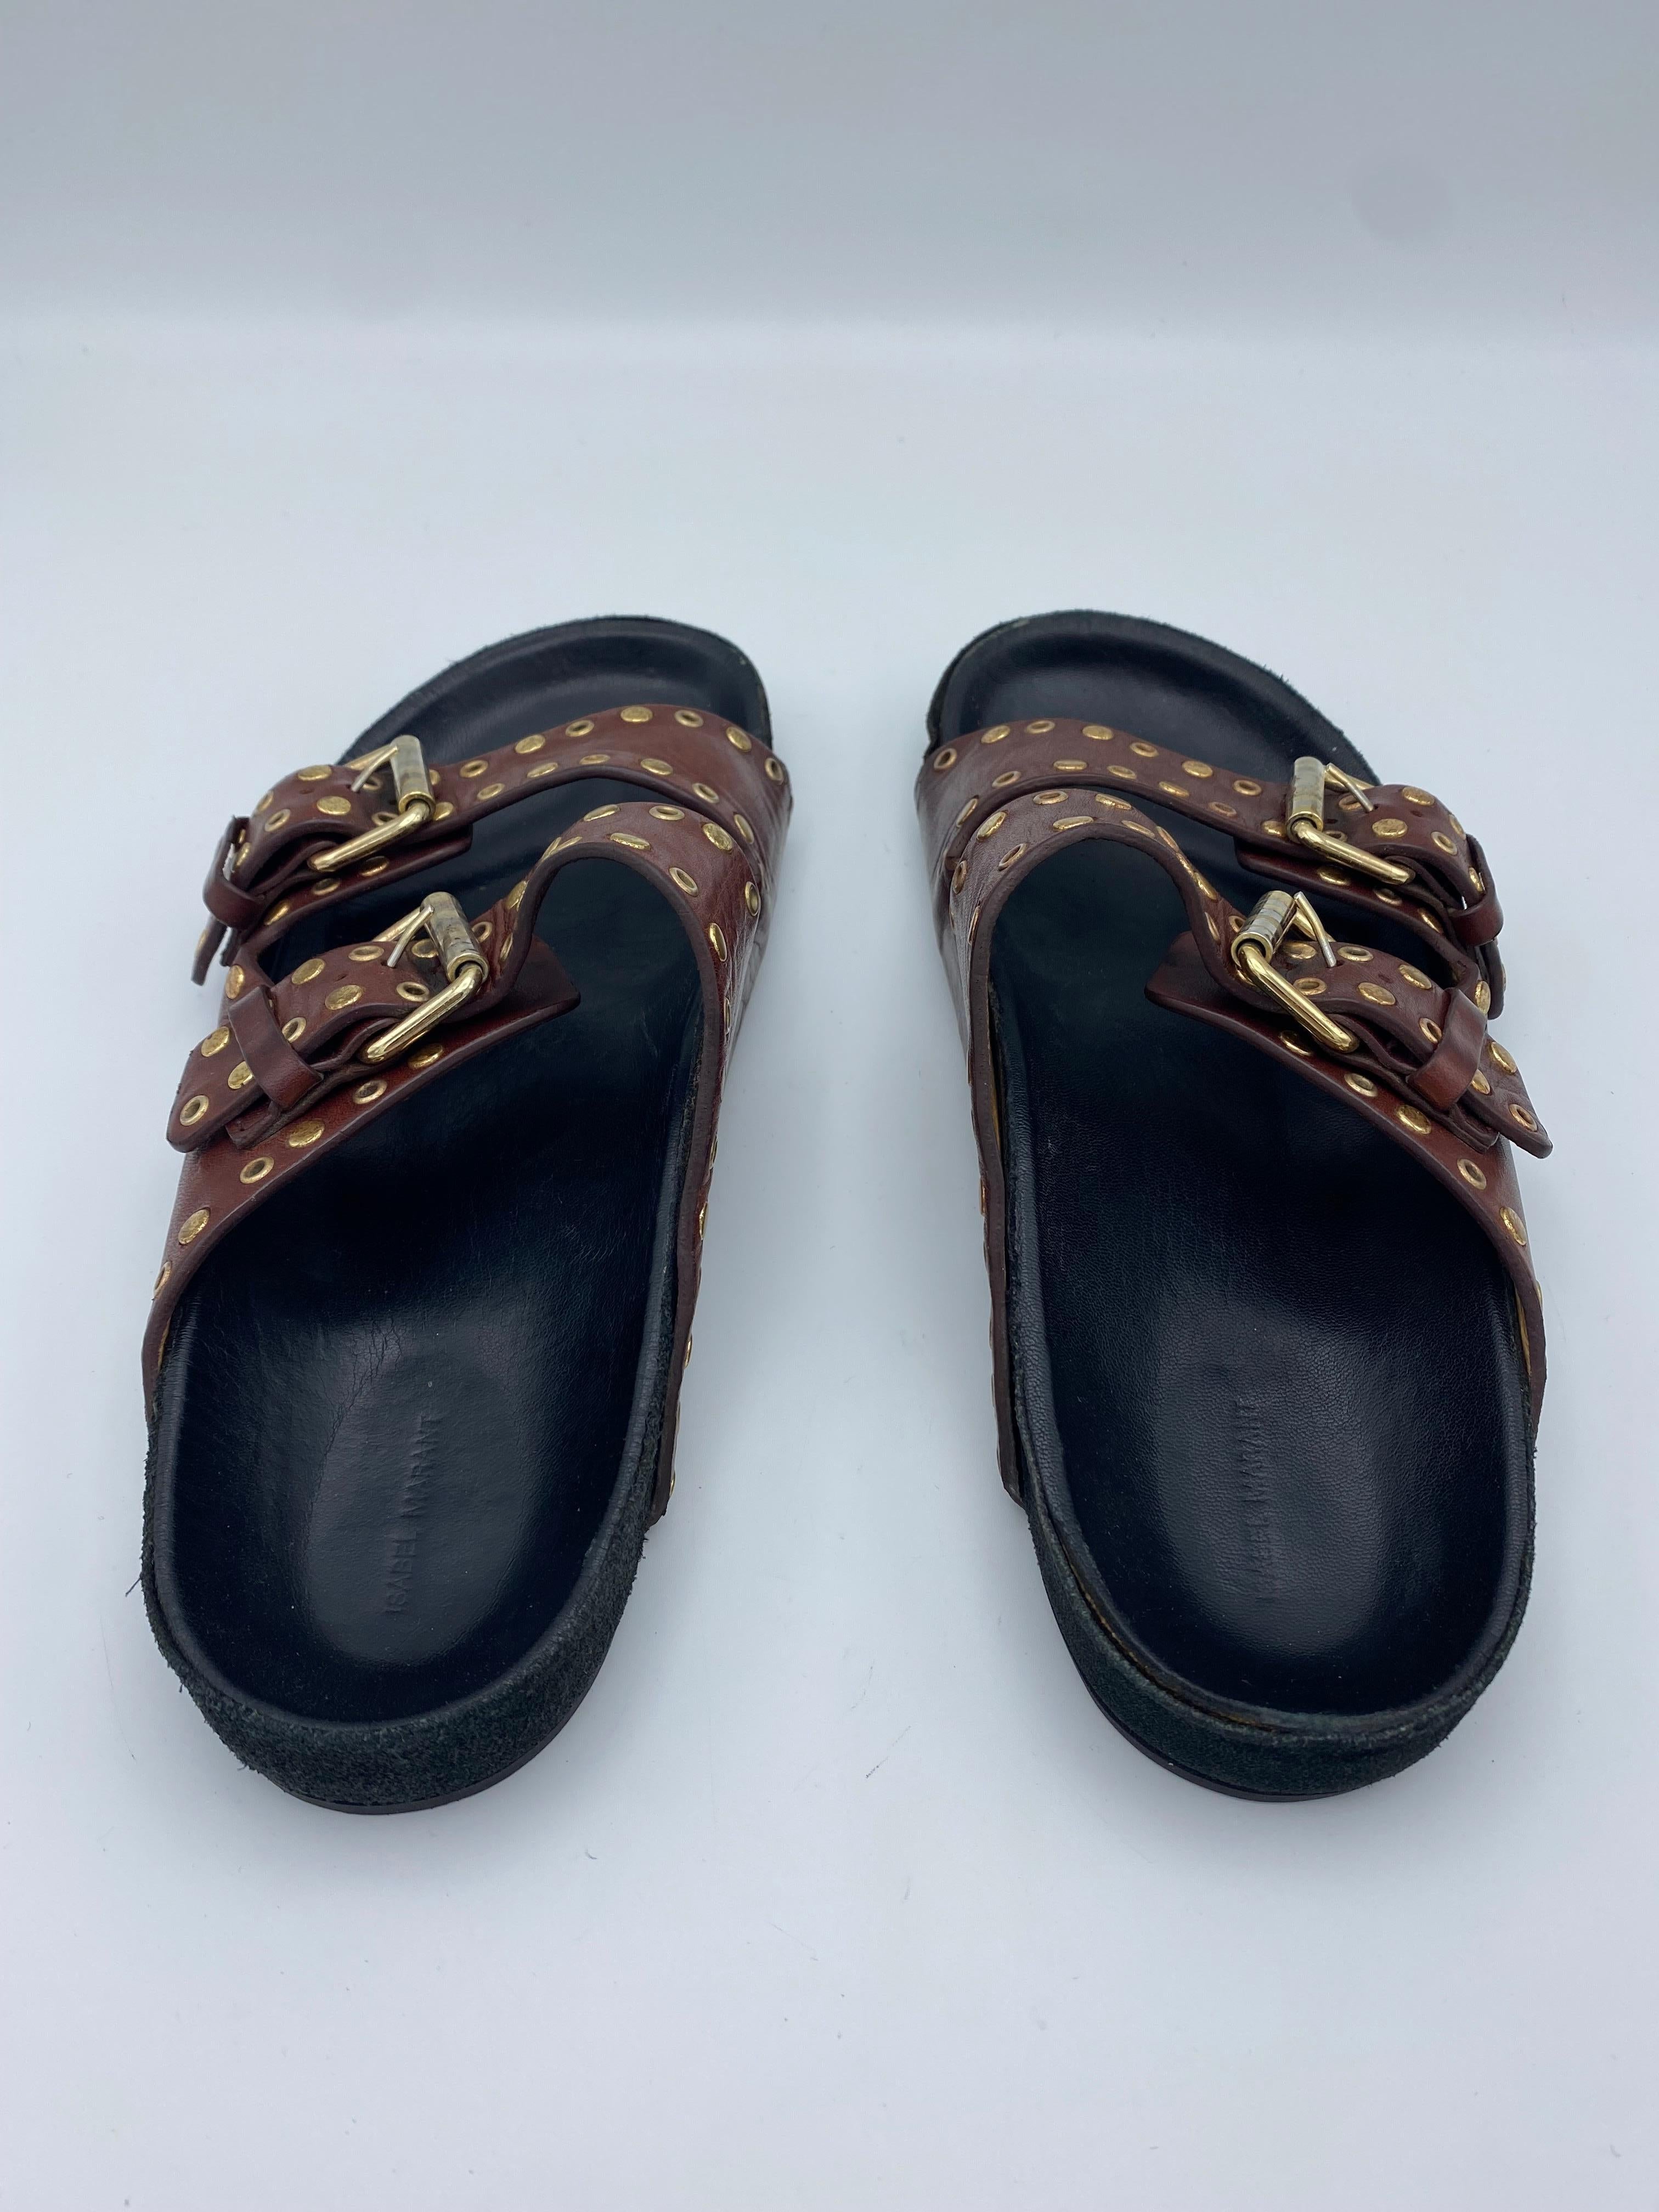 Isabel Marant Lennyo Grommet Leather Slides Sandals, Size  In Good Condition For Sale In Beverly Hills, CA